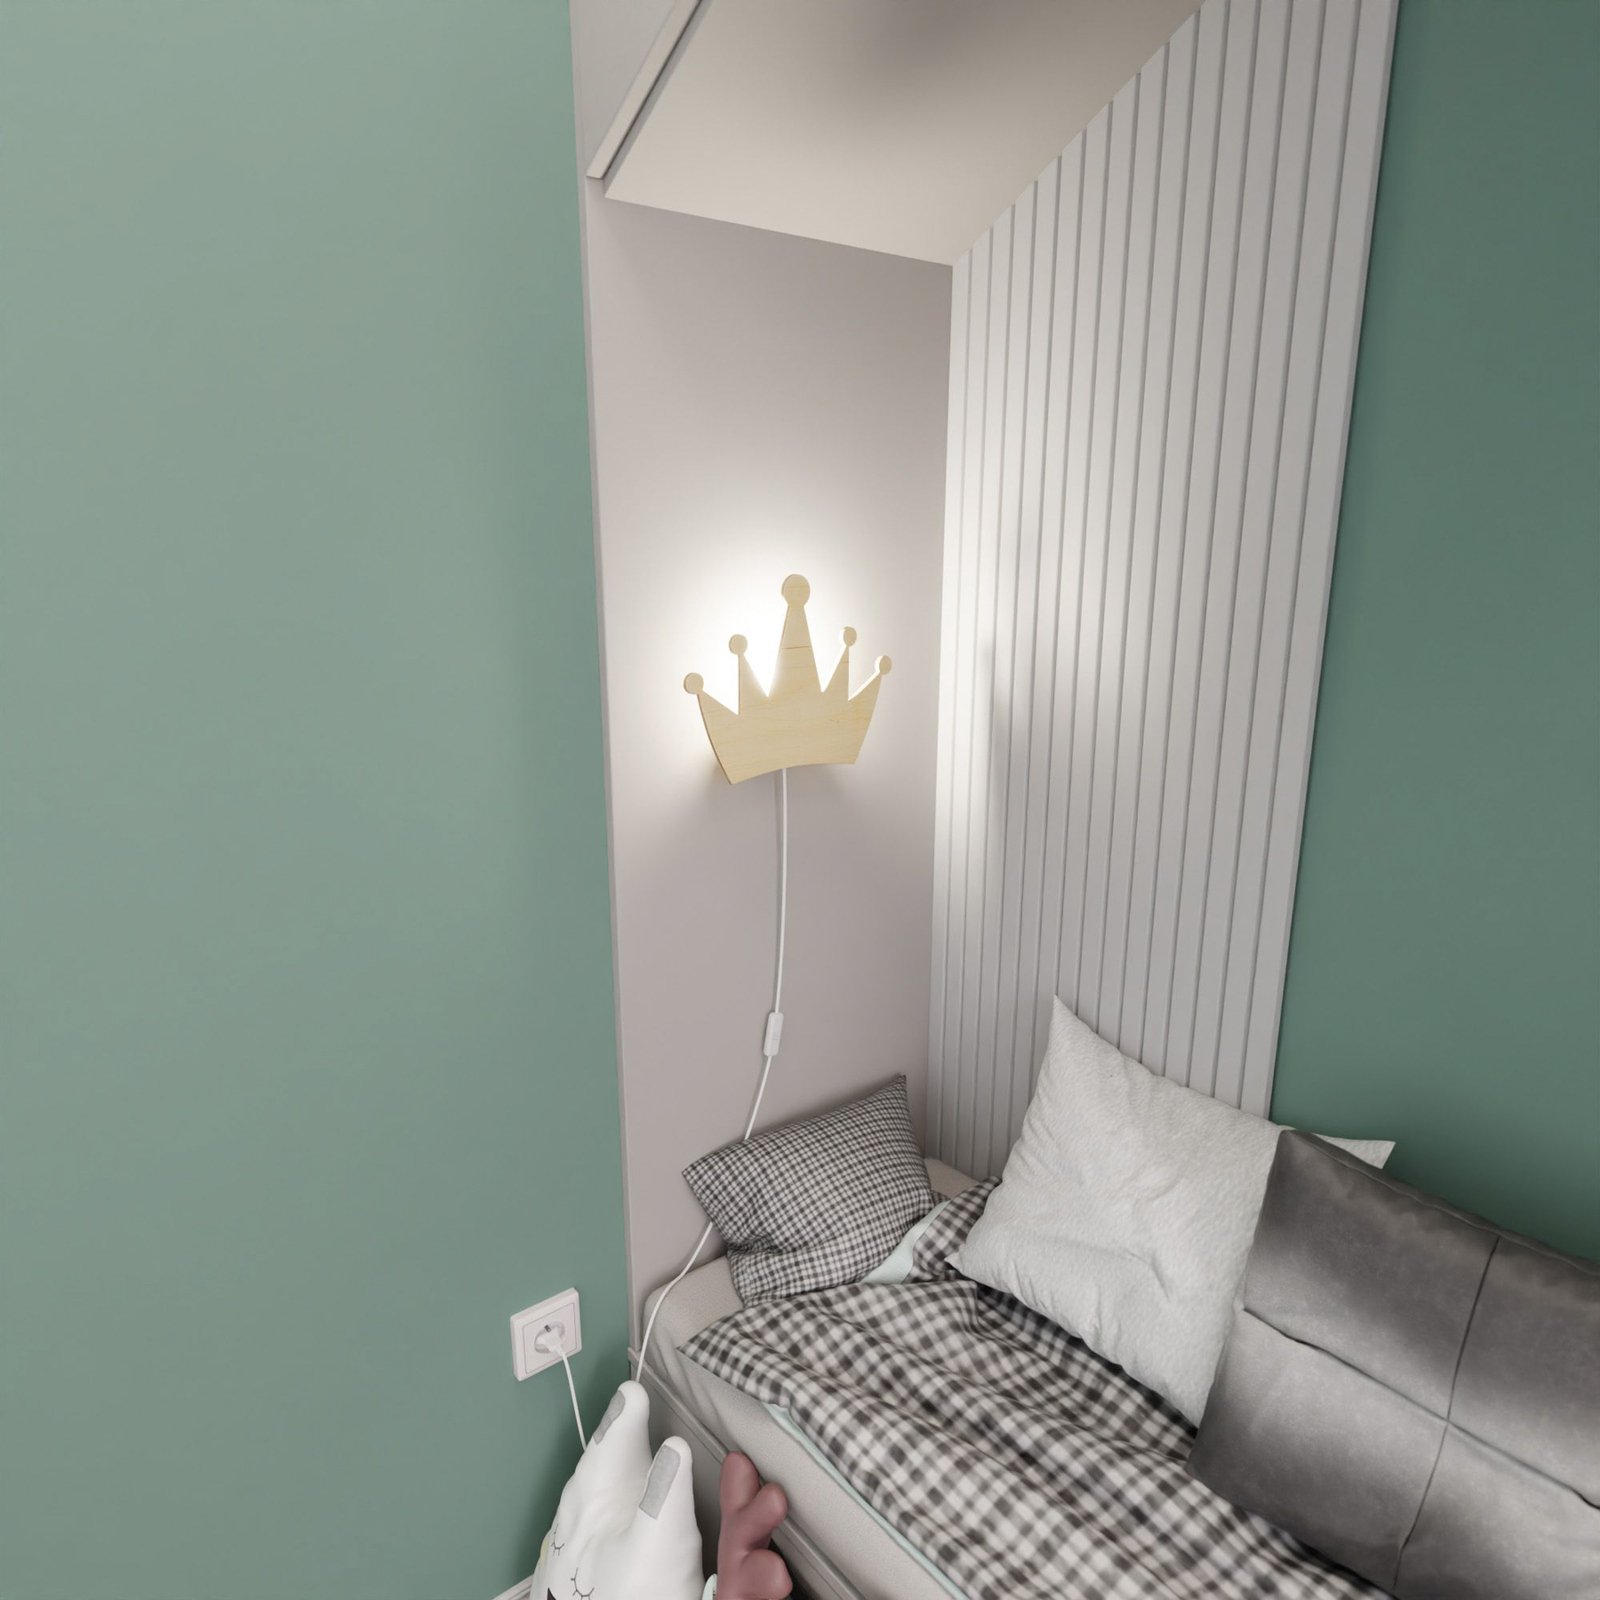 Queen wall light, made of wood, with plug and switch